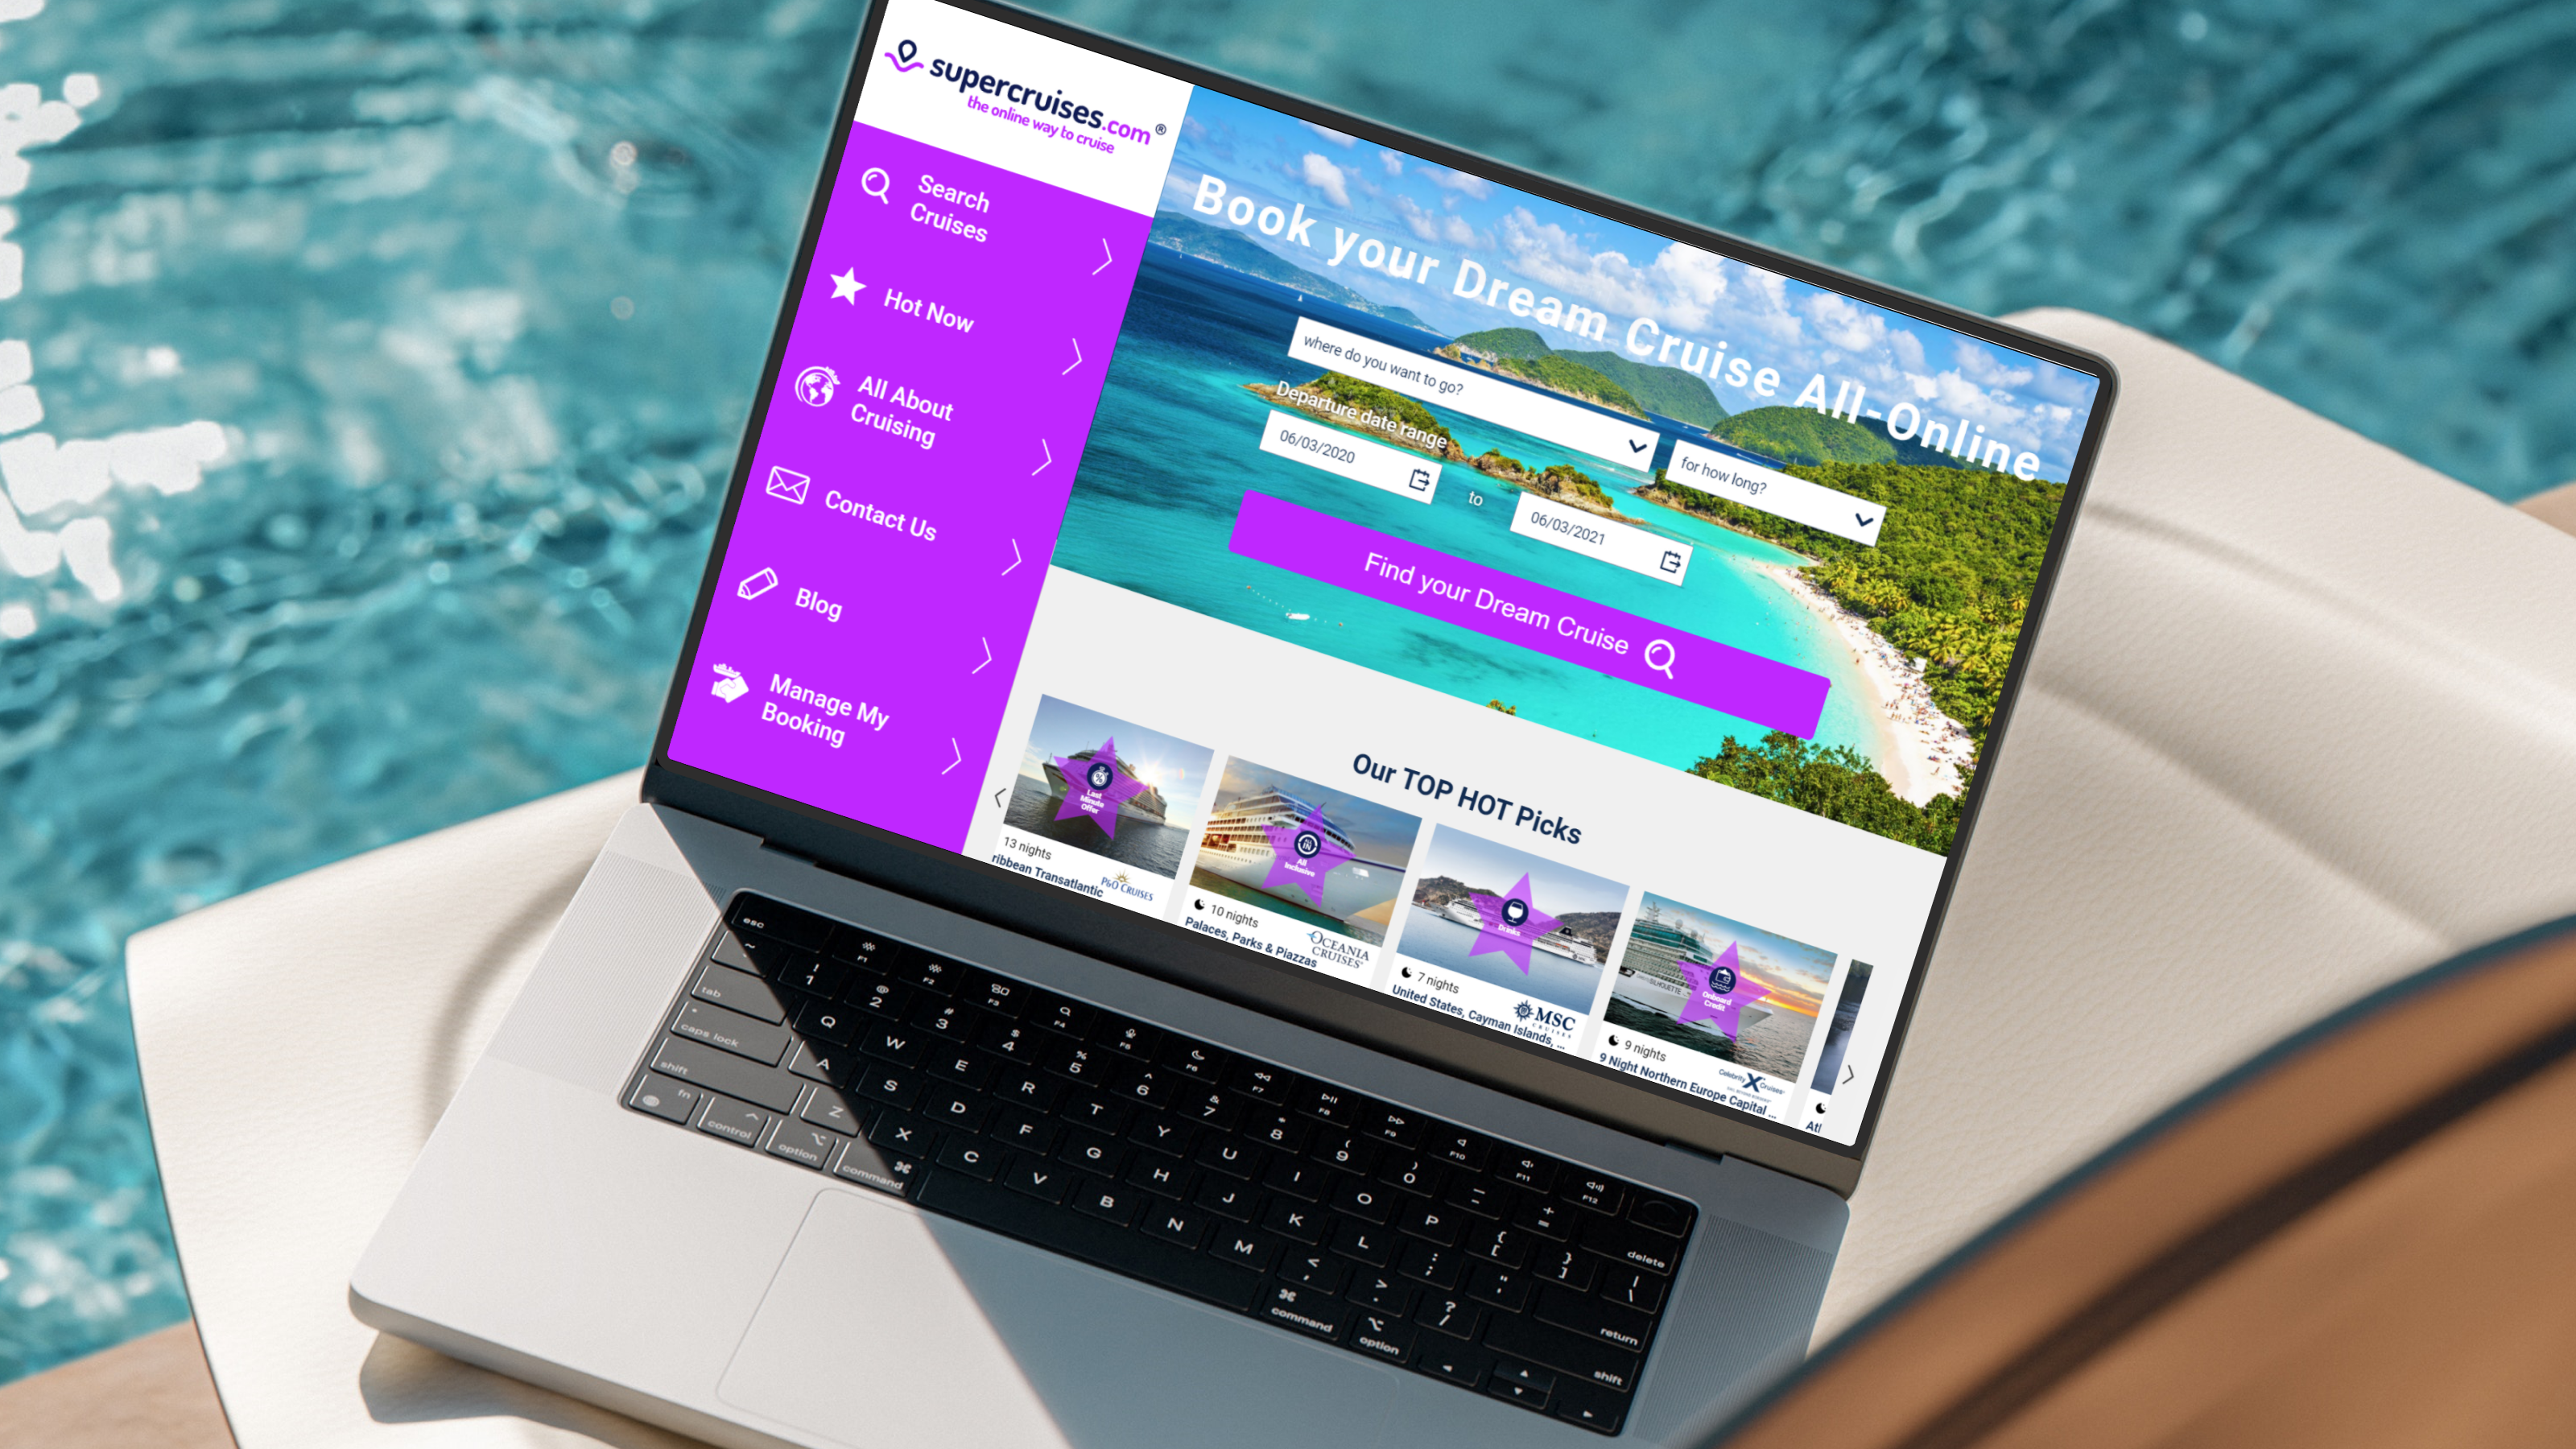 Laptop on poolside lounger with filter view and search box on travel booking platform